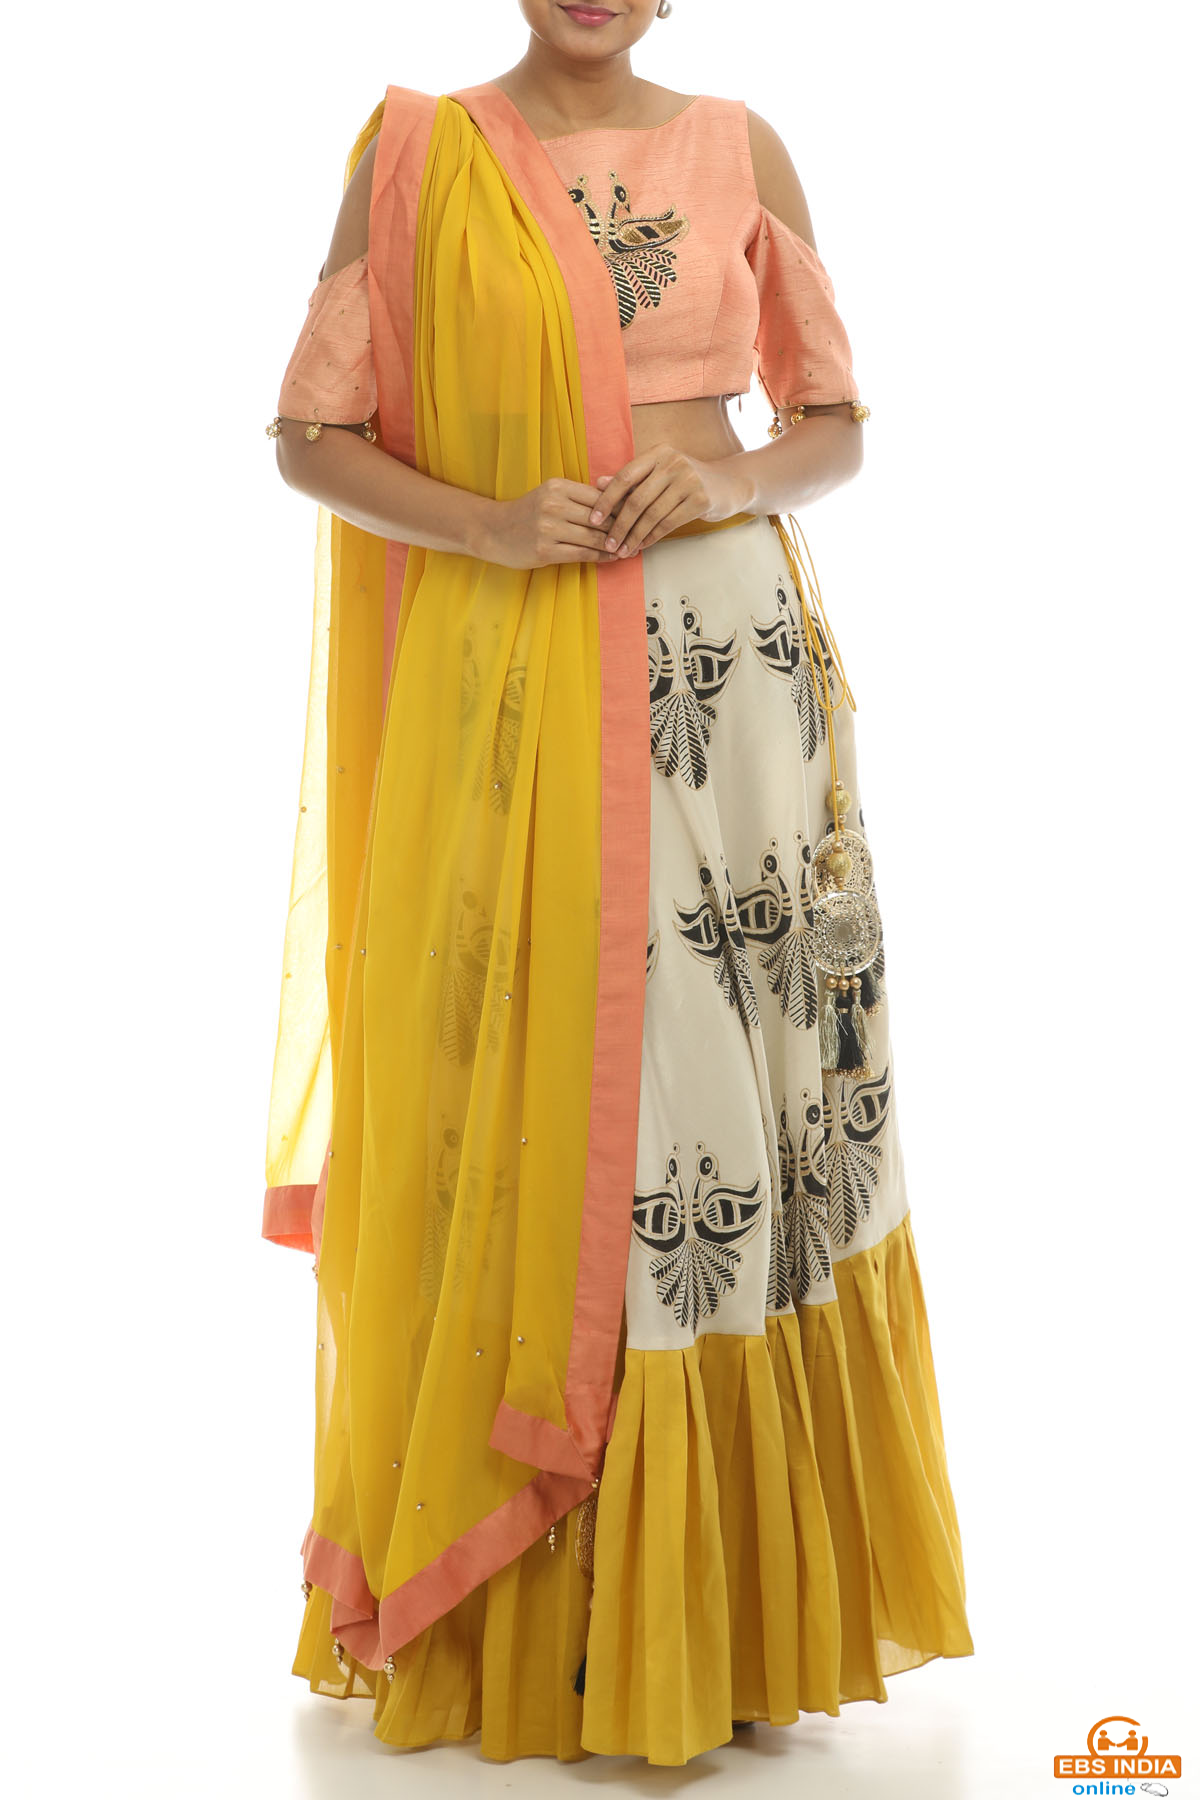 Shop For Designer Lehengas From TheHLabel!